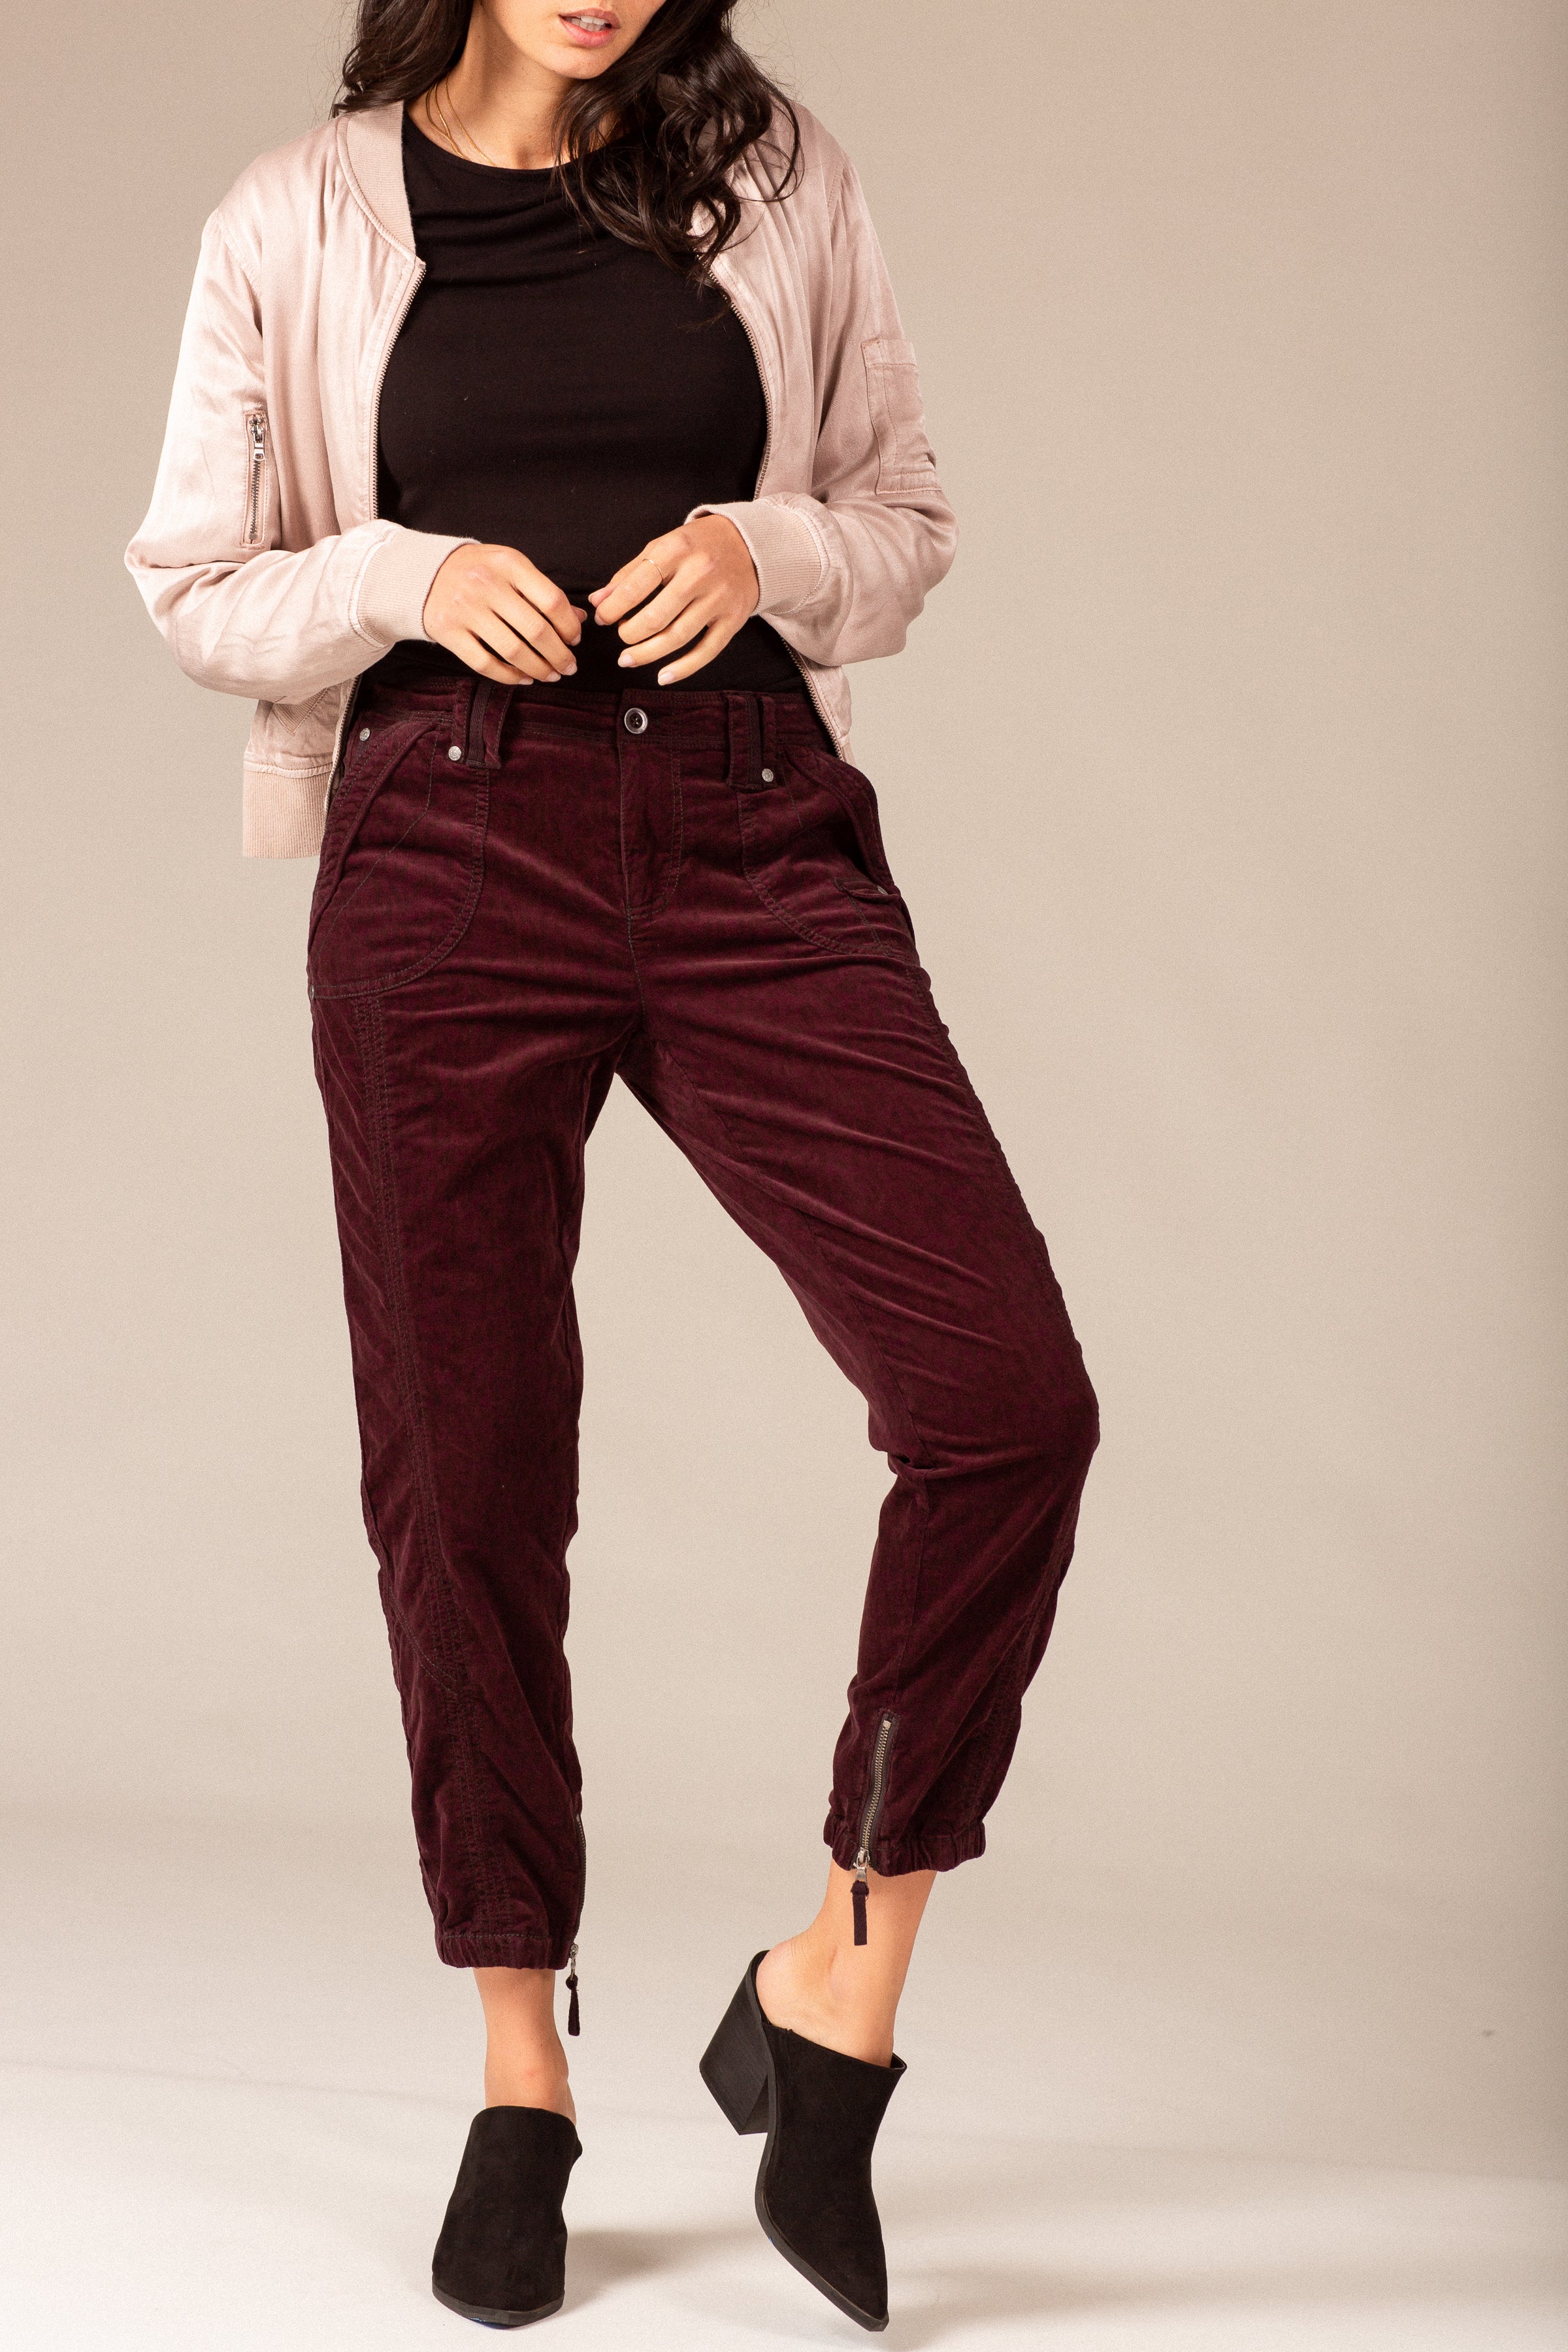 Burgundy Corduroy Jeans with Pants Outfits For Women (3 ideas & outfits) |  Lookastic